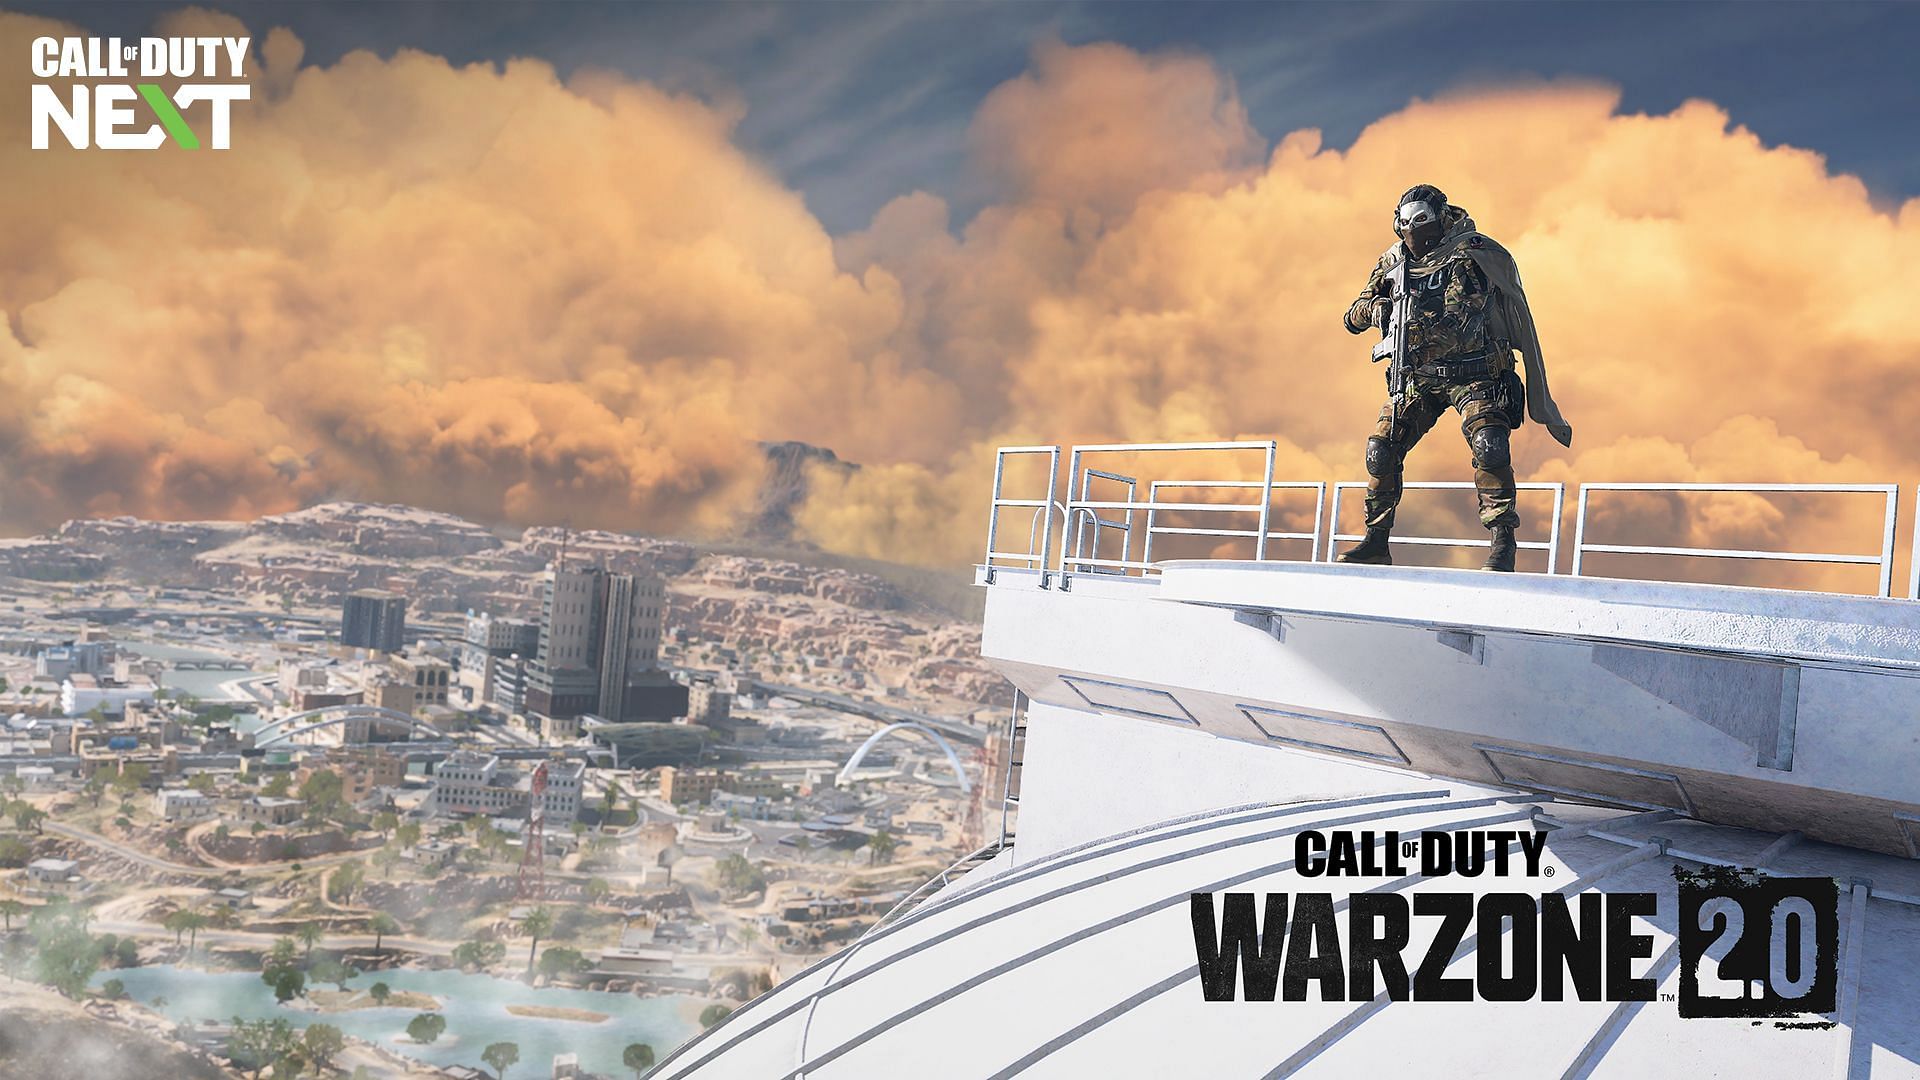 Warzone 2.0 will be released on November 16 (Image via Activision)